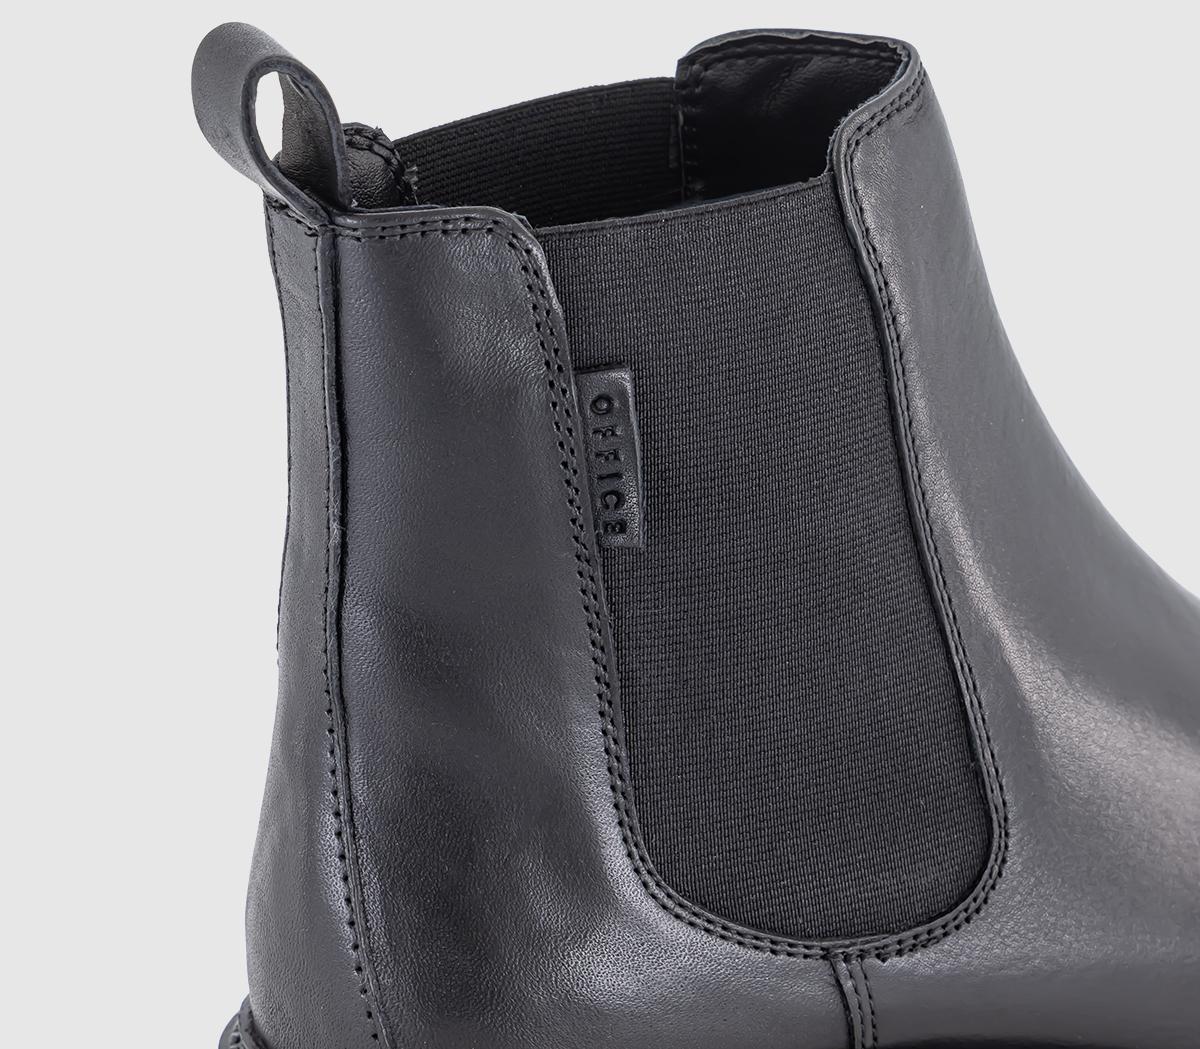 OFFICE Angelica Cleated Chelsea Boots Black Leather - Women's Ankle Boots